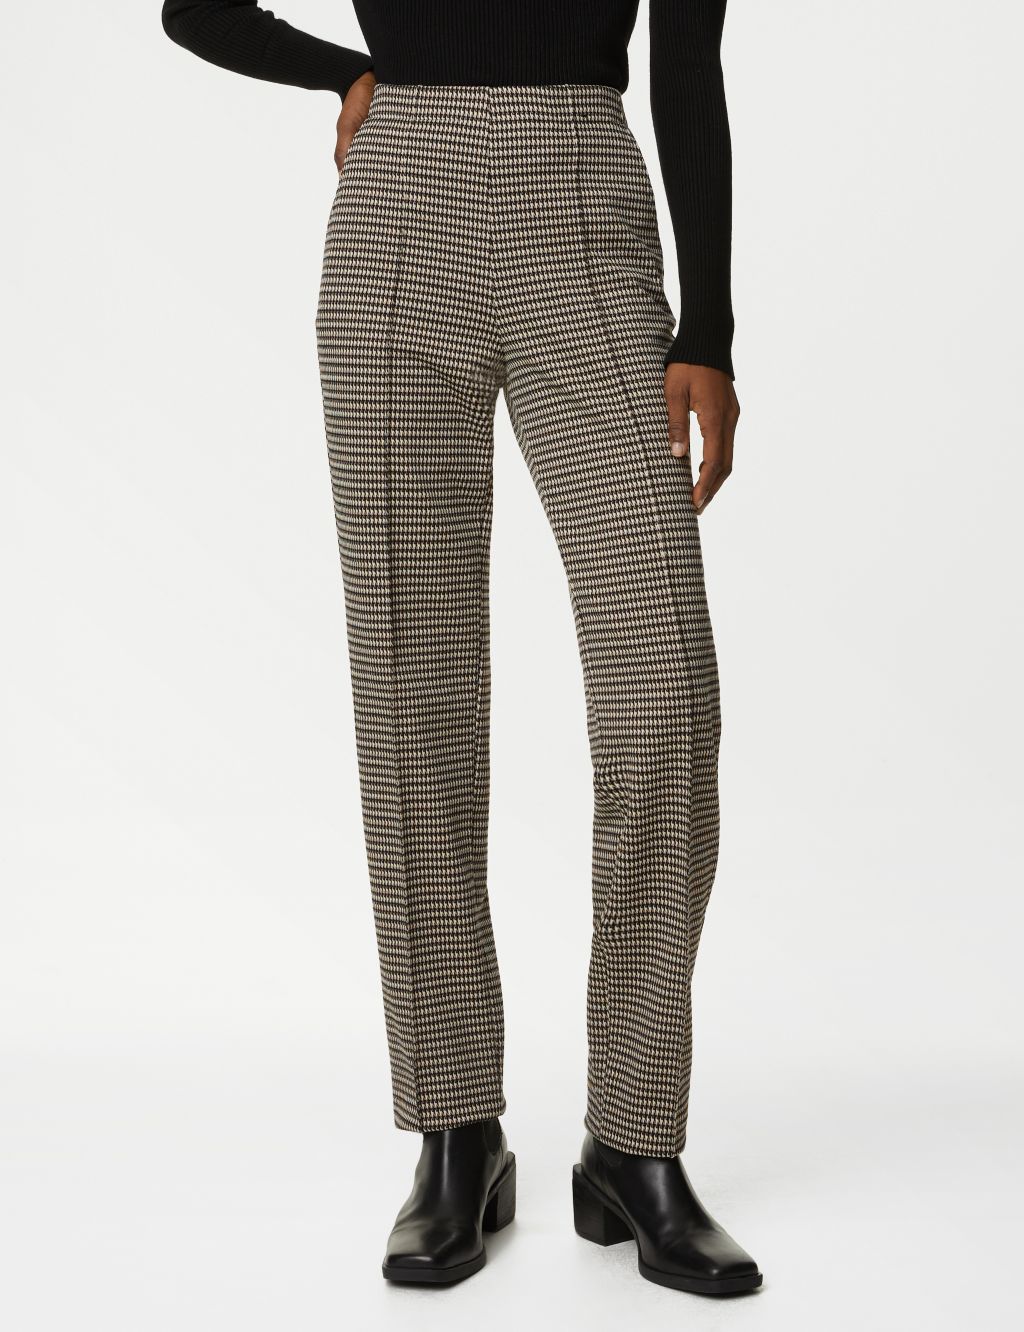 Twill Jersey Houndstooth Pintuck Trousers image 3